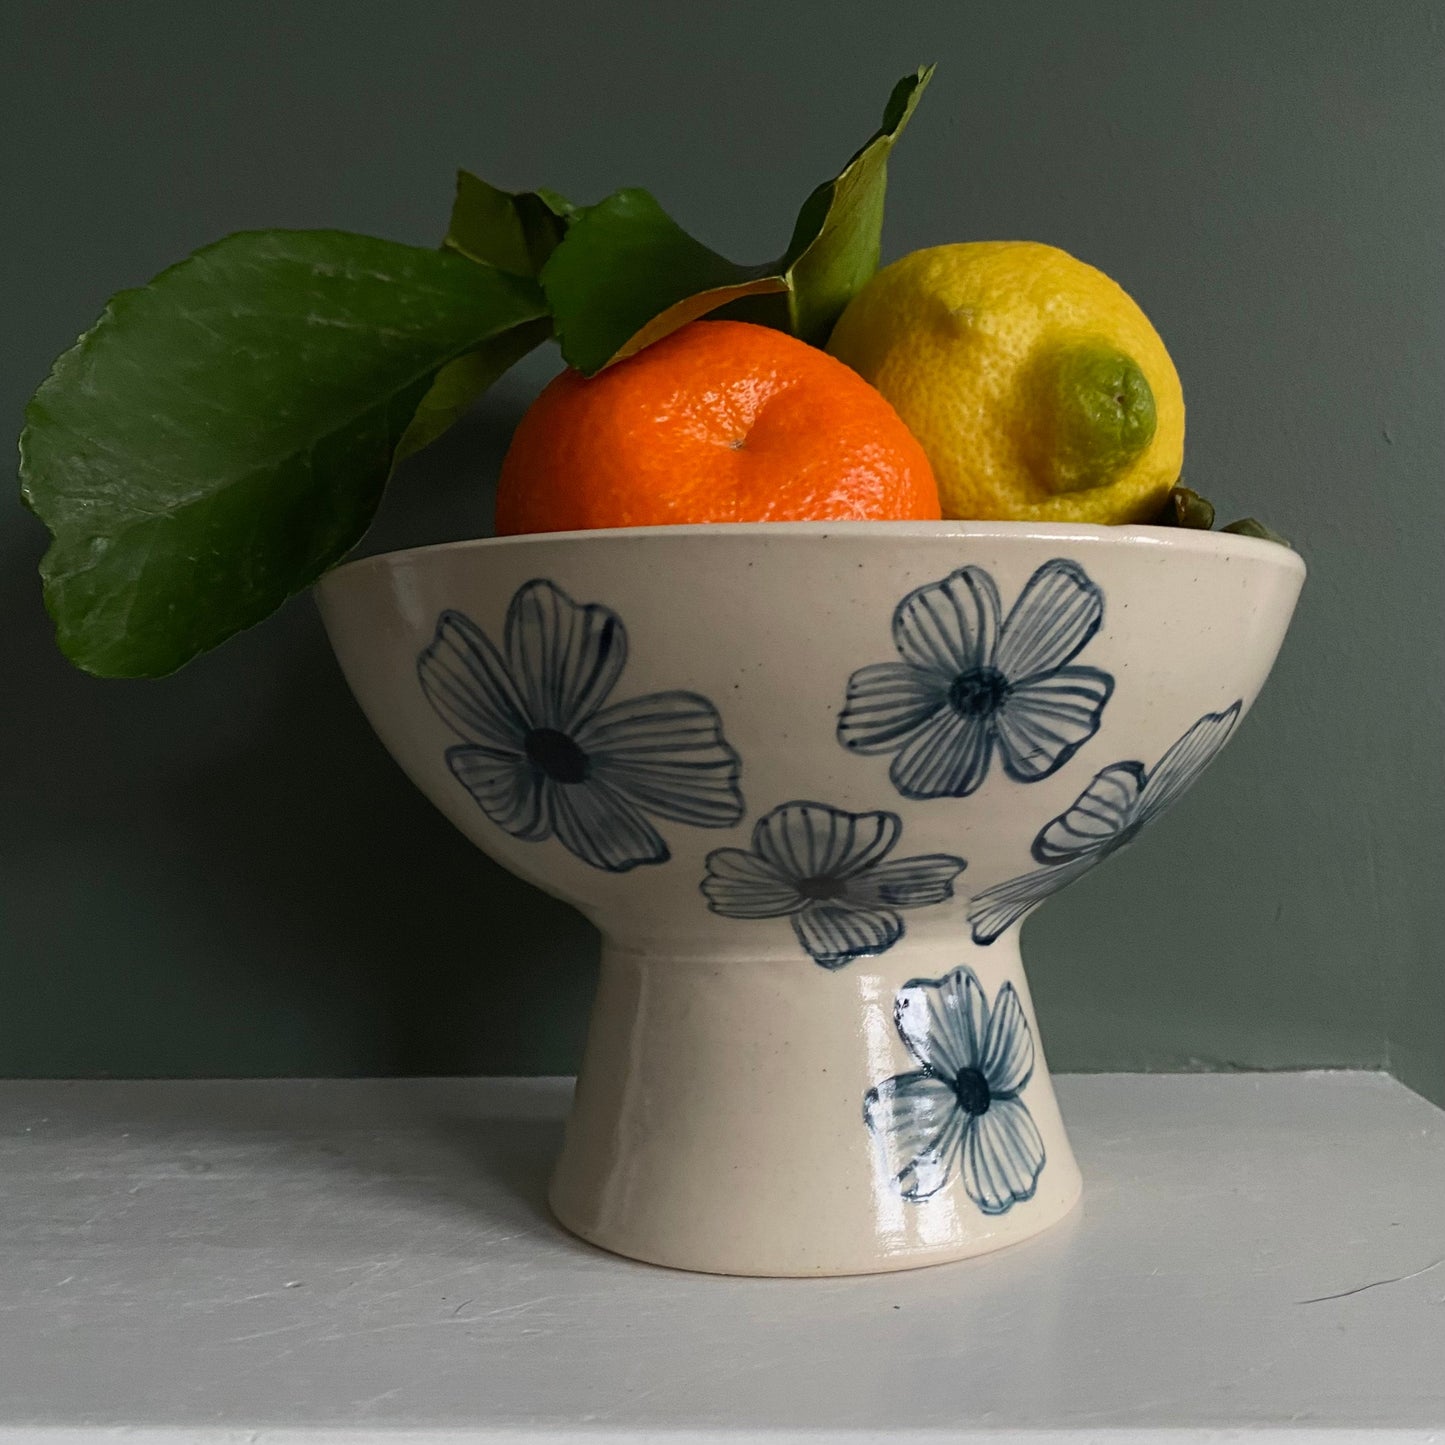 Small Blue and white ceramic pedestal bowl with flowers design, pottery fruit bowl, hand painted and wheel thrown stoneware